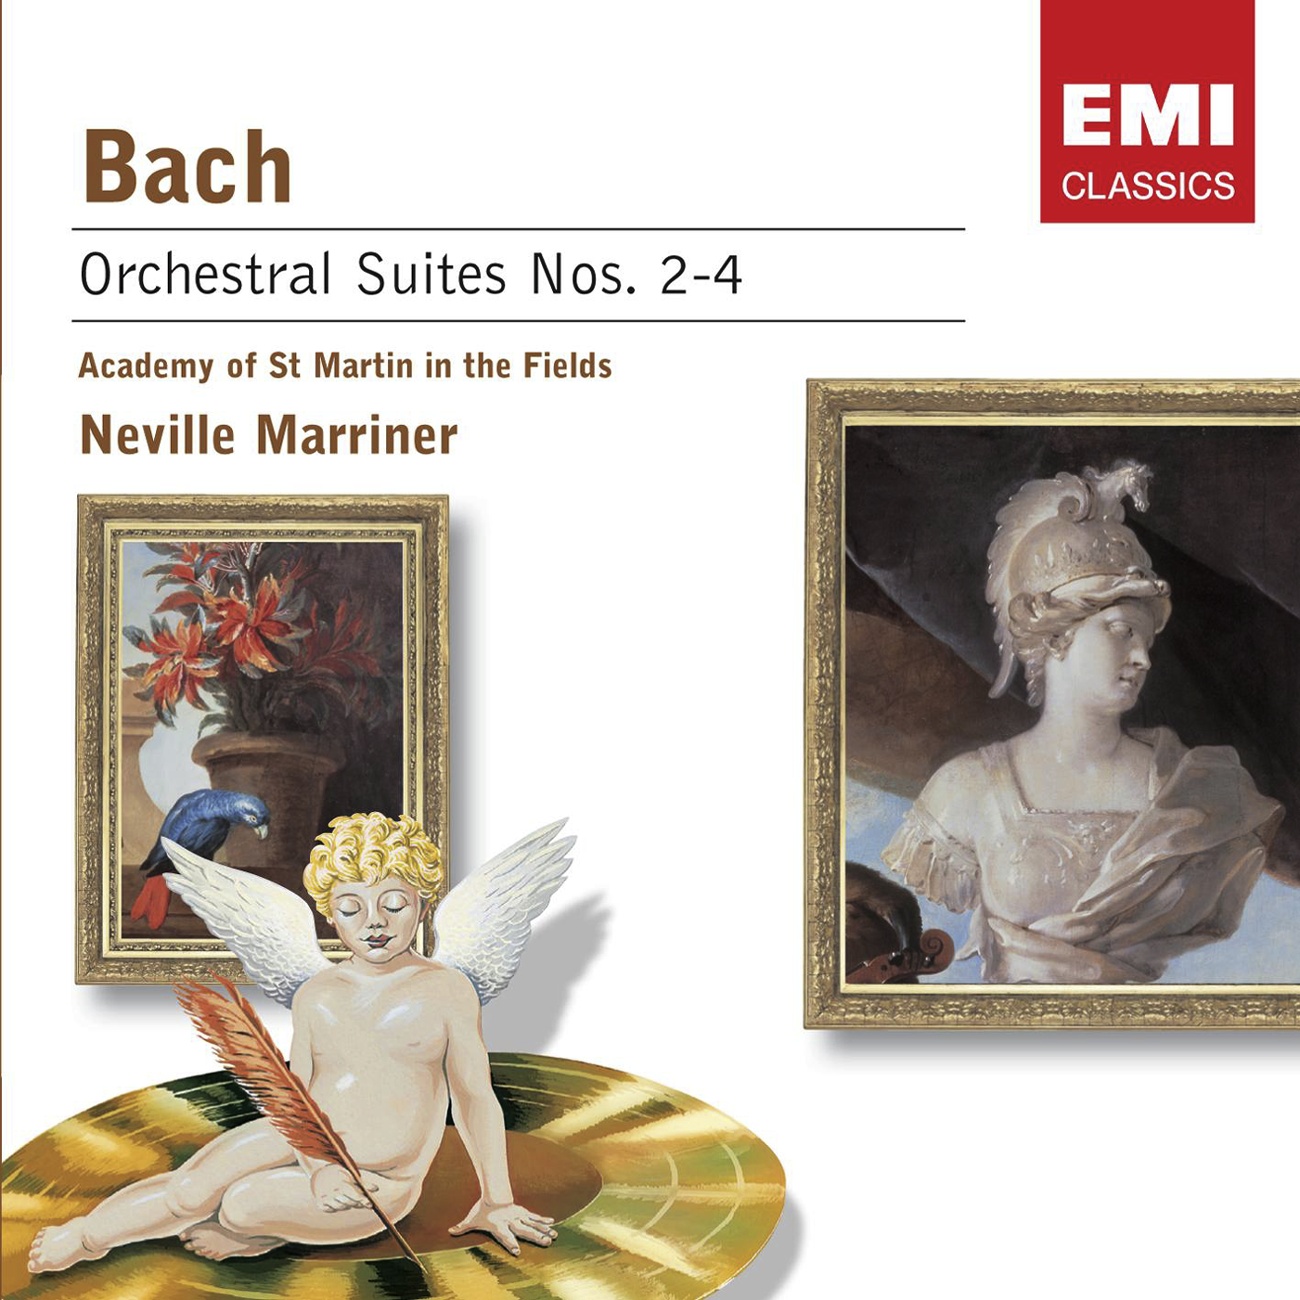 4 Orchestral Suites, BWV 1066-9, Suite No.4 in D Major, BWV 1069 (3 oboes, 3 trumpets, strings and timpani): Ouverture